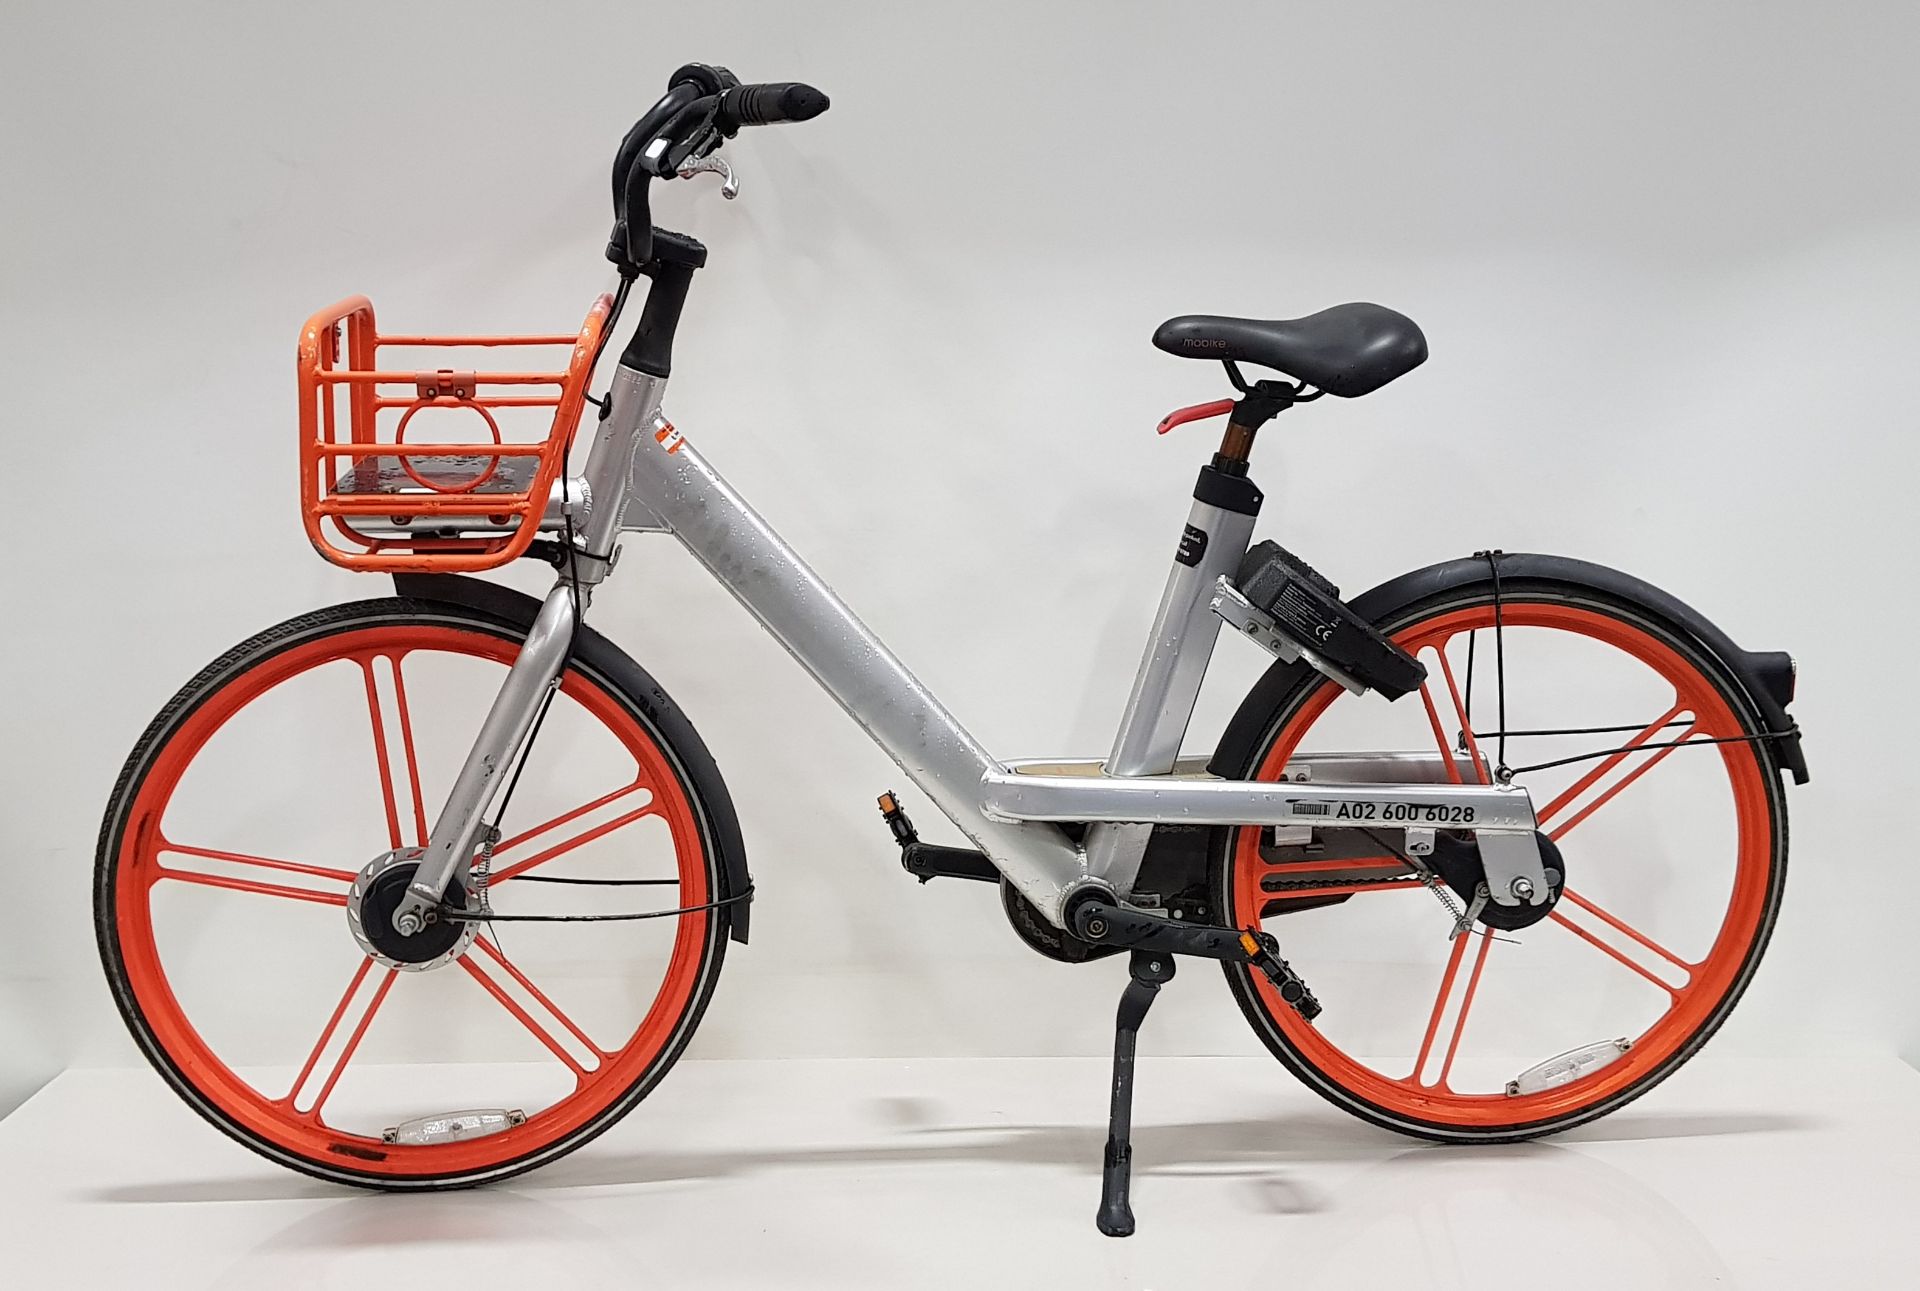 4 X ORANGE & SILVER CITY / CAMPING BICYCLES - ROBUST ALUMINIUM 19 X 48 FRAME, SOLID PUNCTURE PROOF